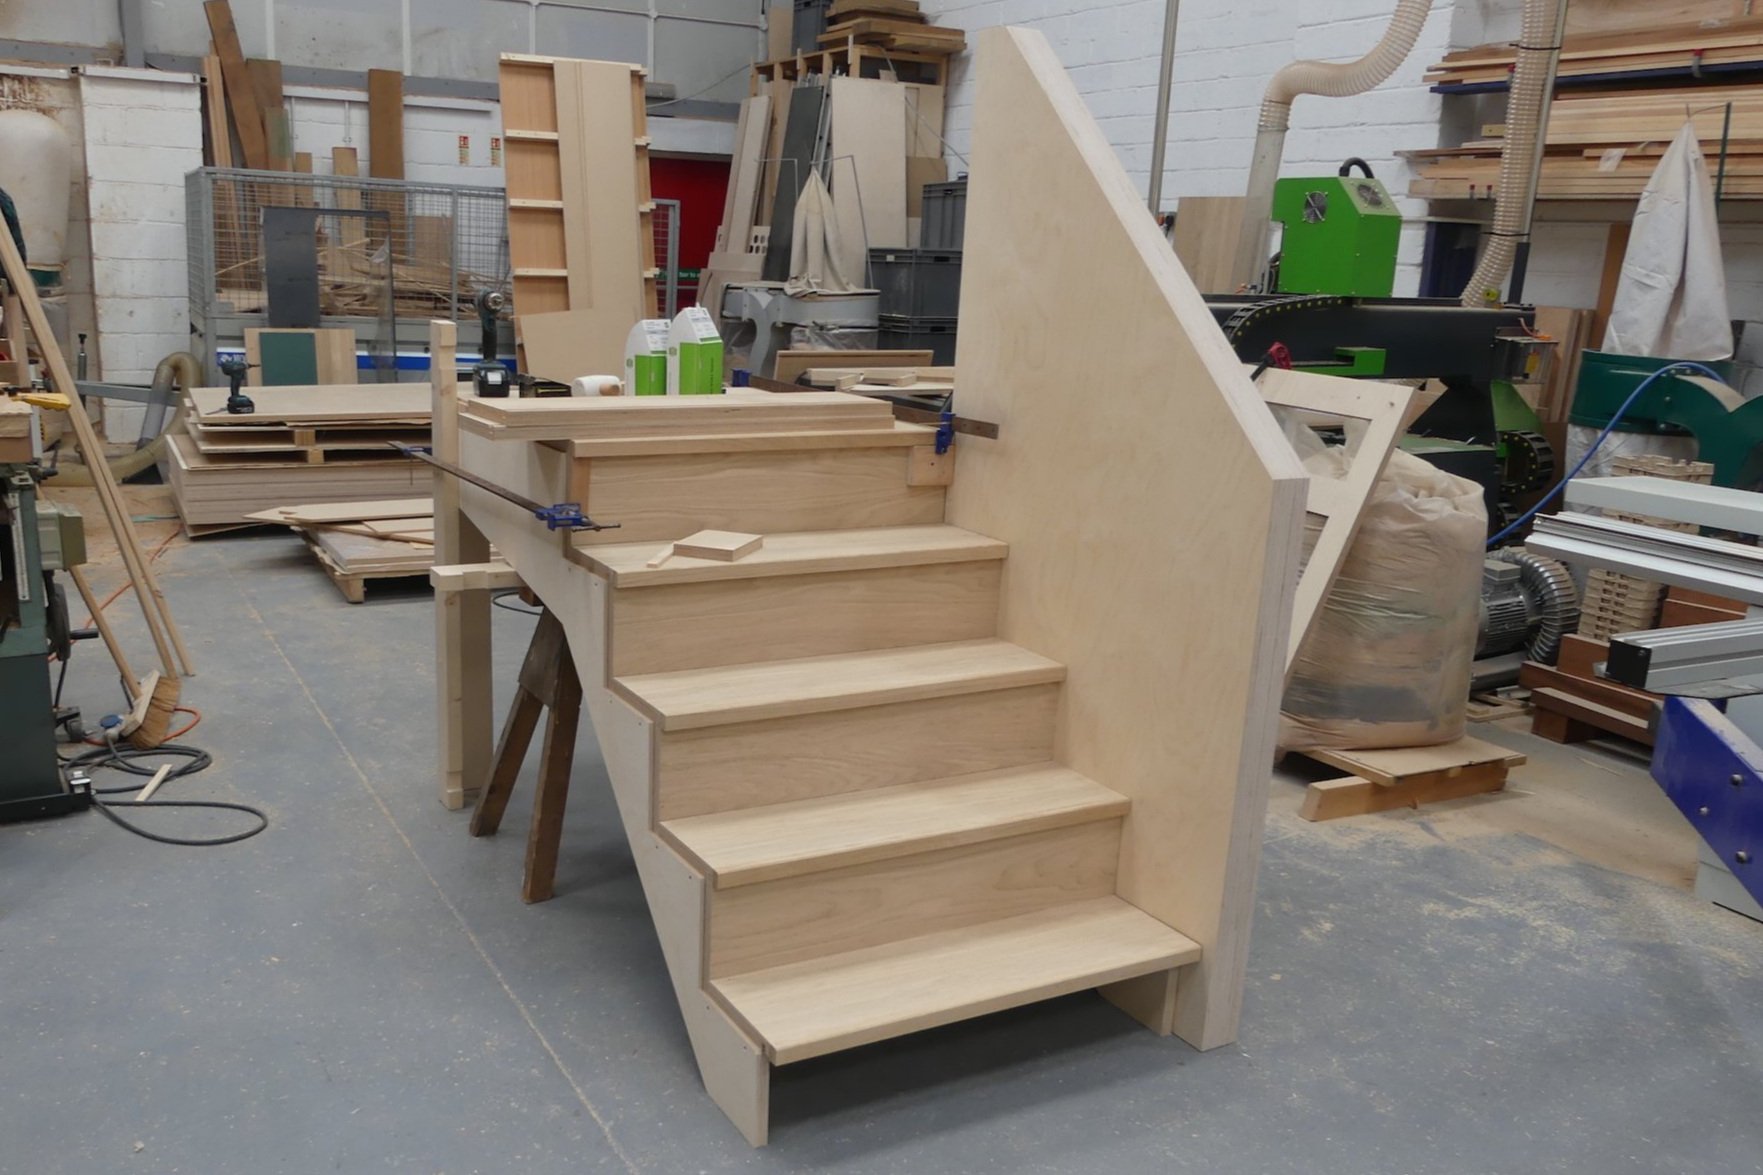 oak and plywood staircase in construction in big workshop